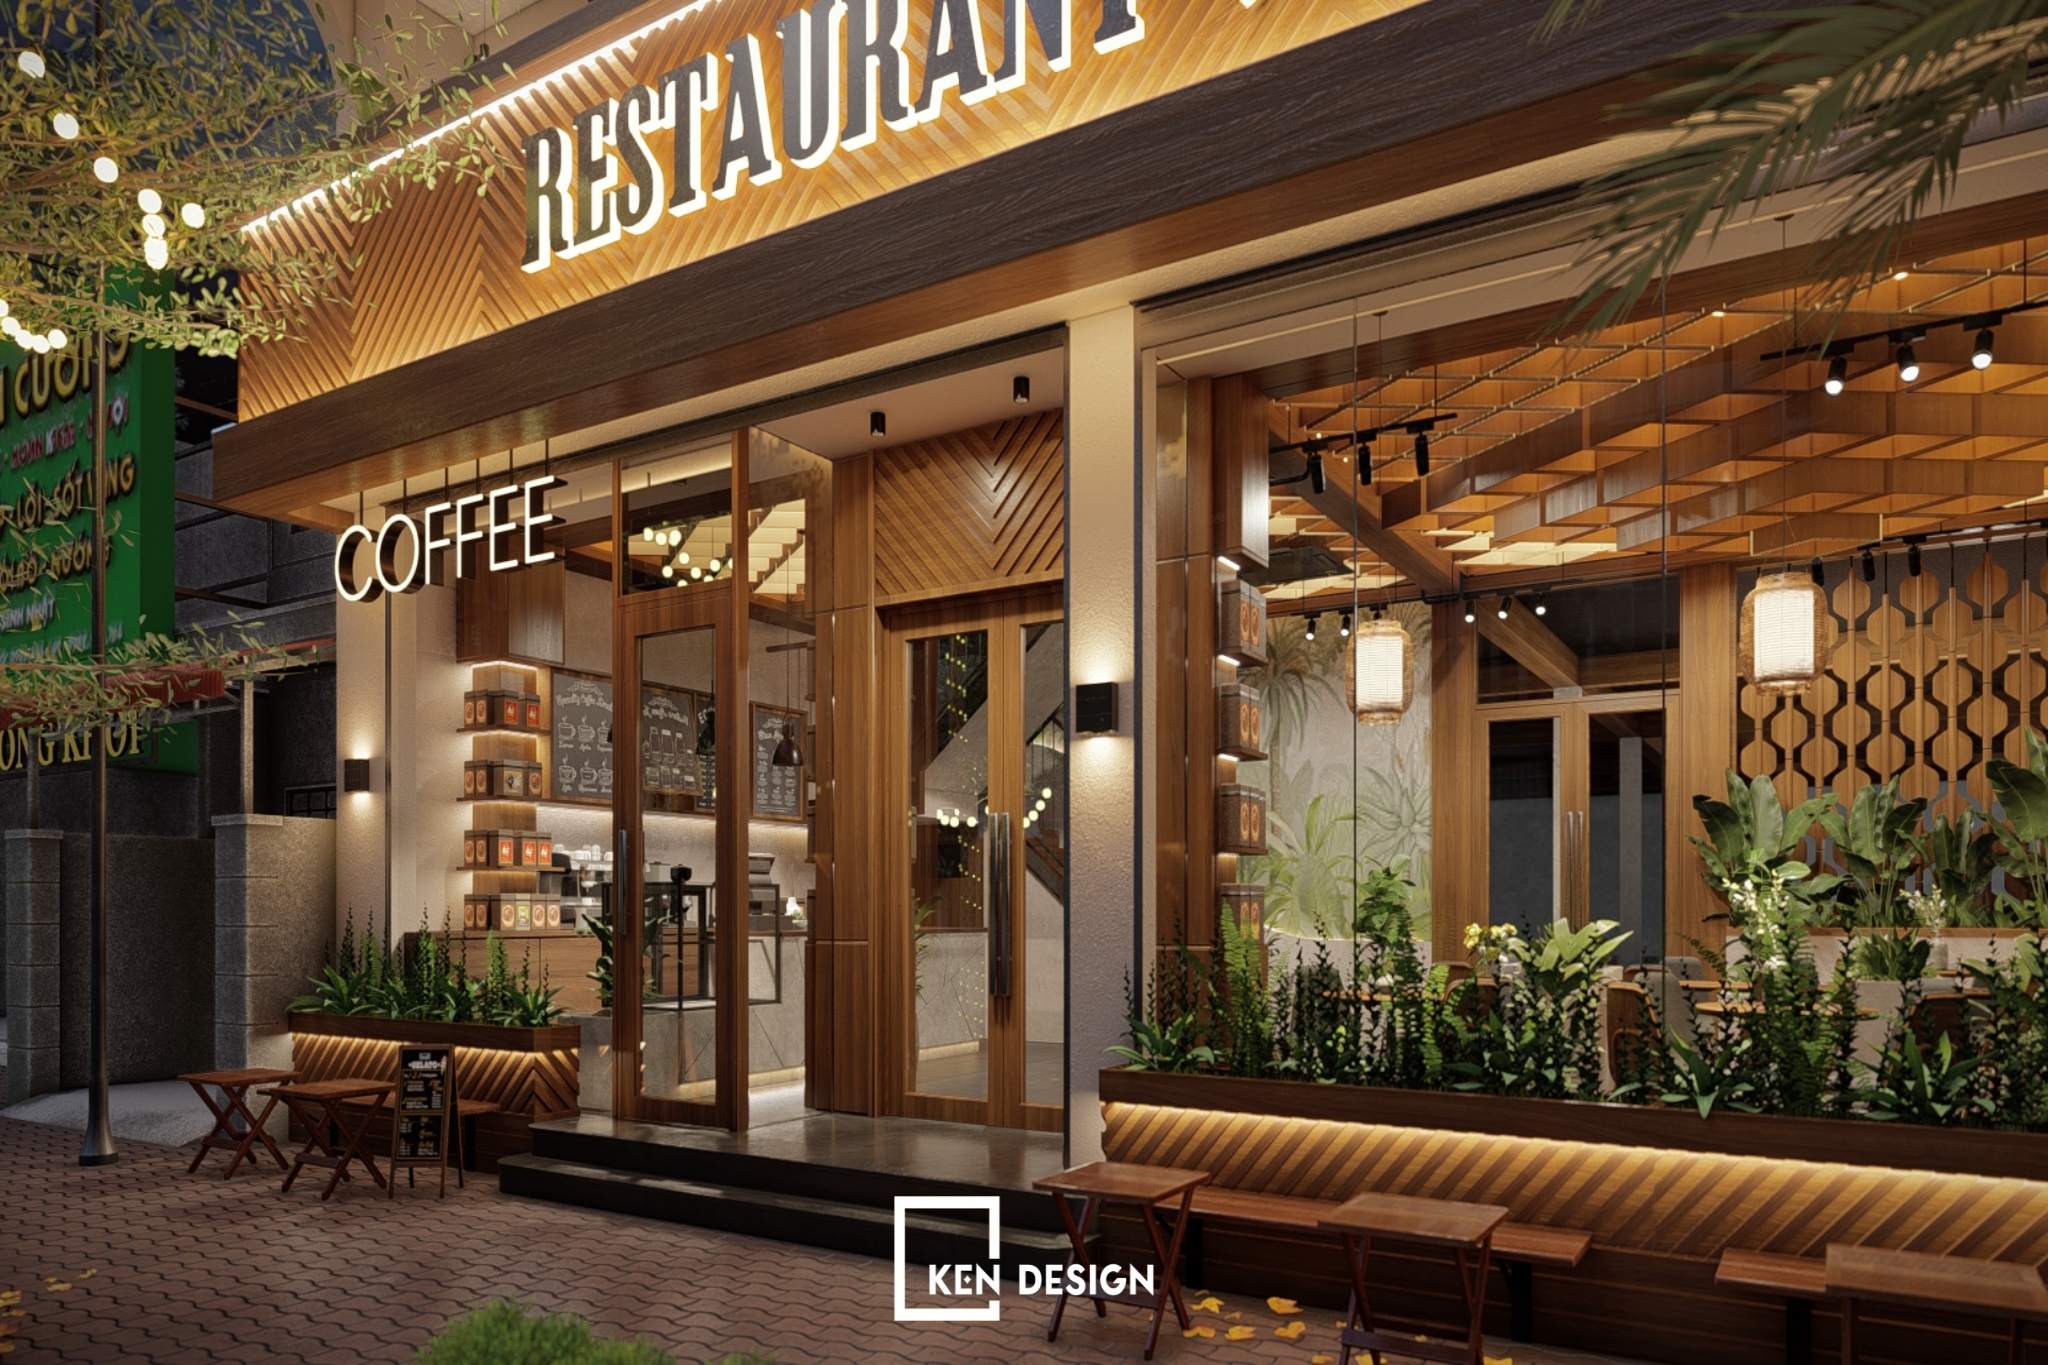 Designing a restaurant and cafe complex - Meeting all customer conveniences in one space